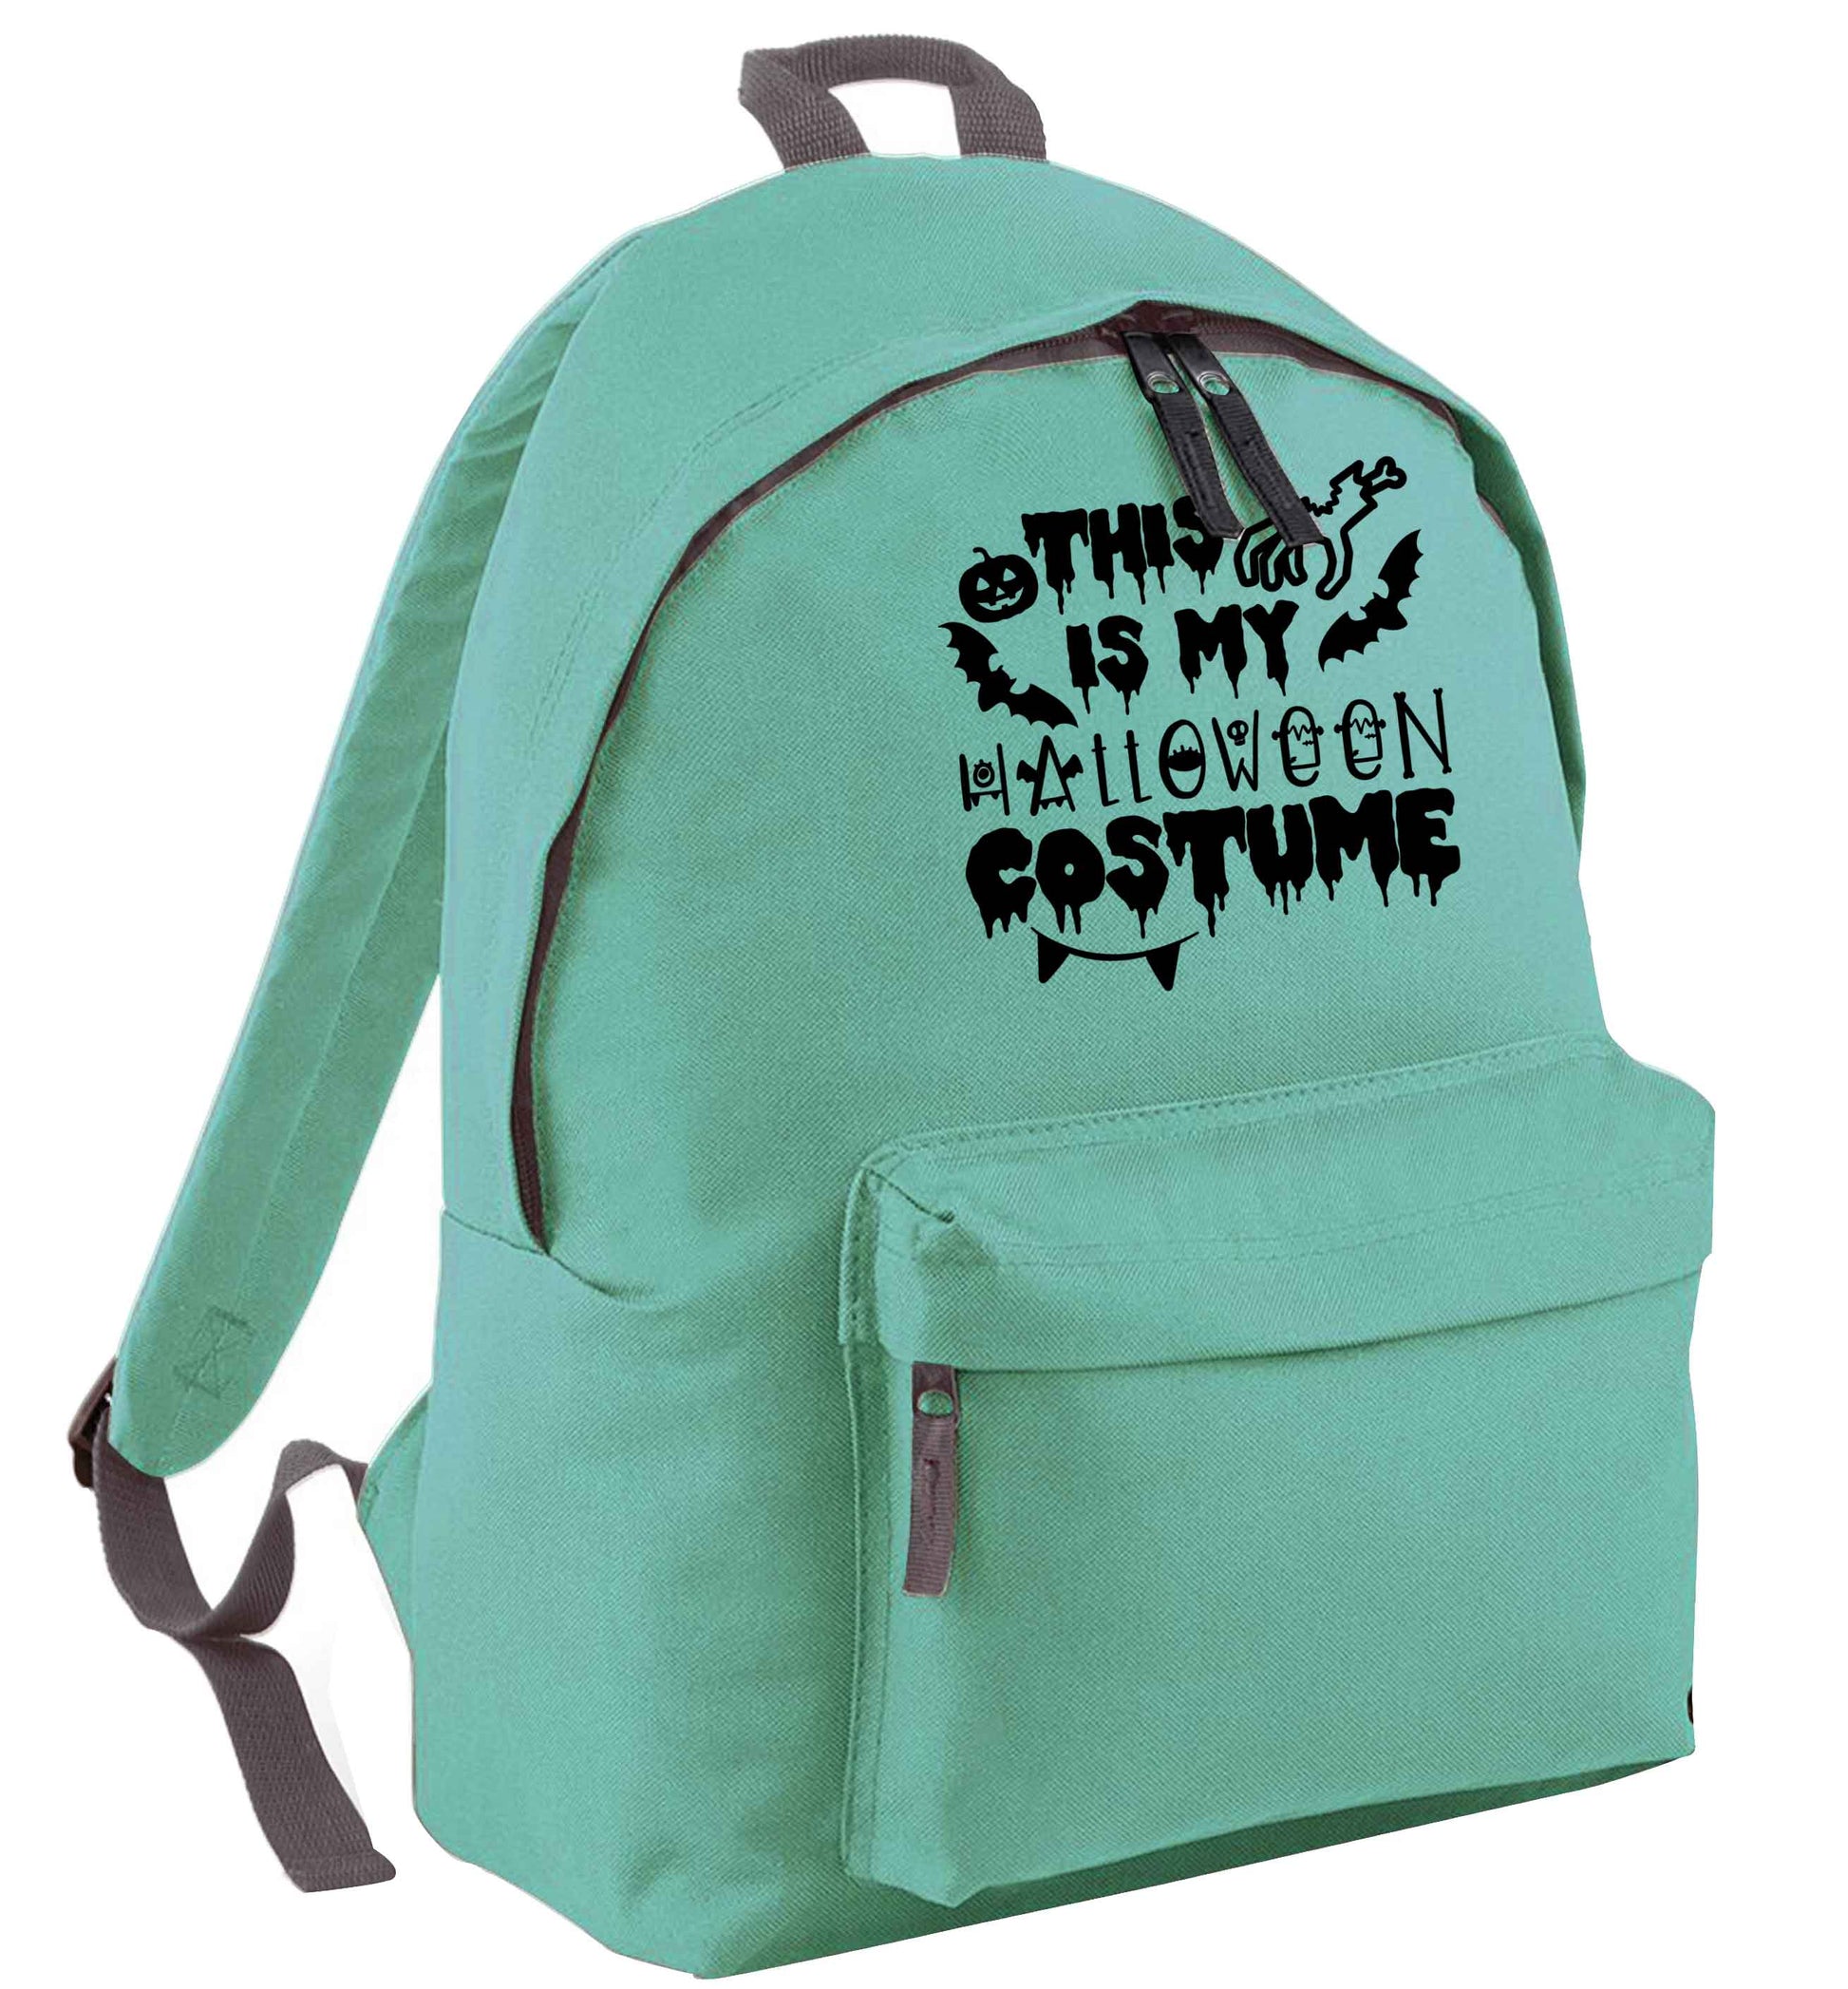 This is my halloween costume mint adults backpack